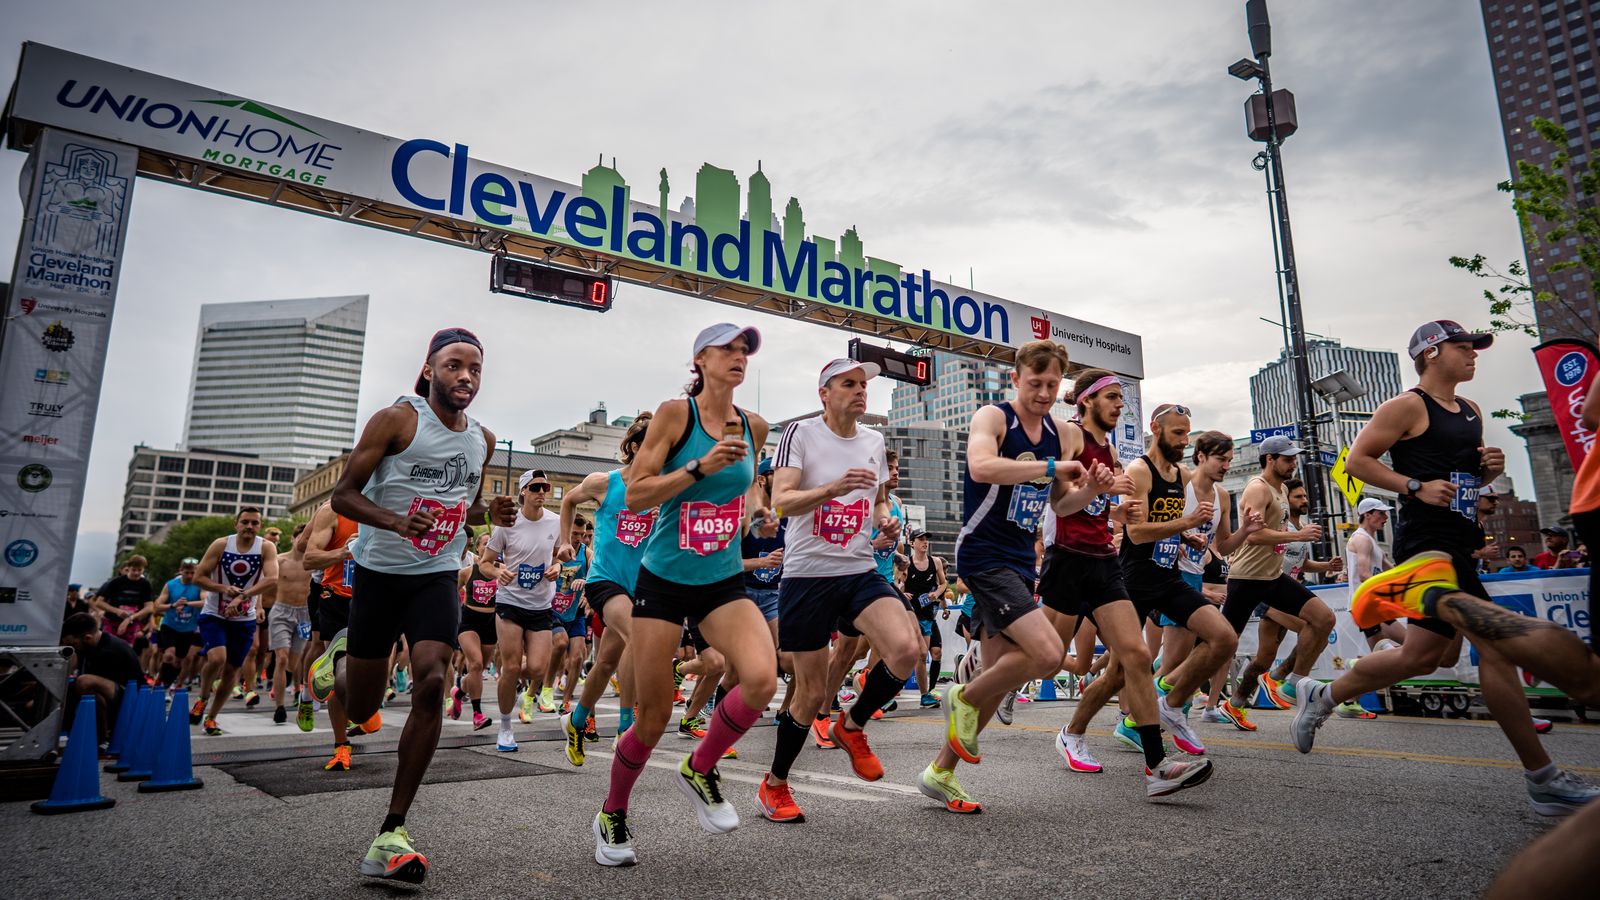 Cleveland Marathon's new route features more than 60 turns Axios